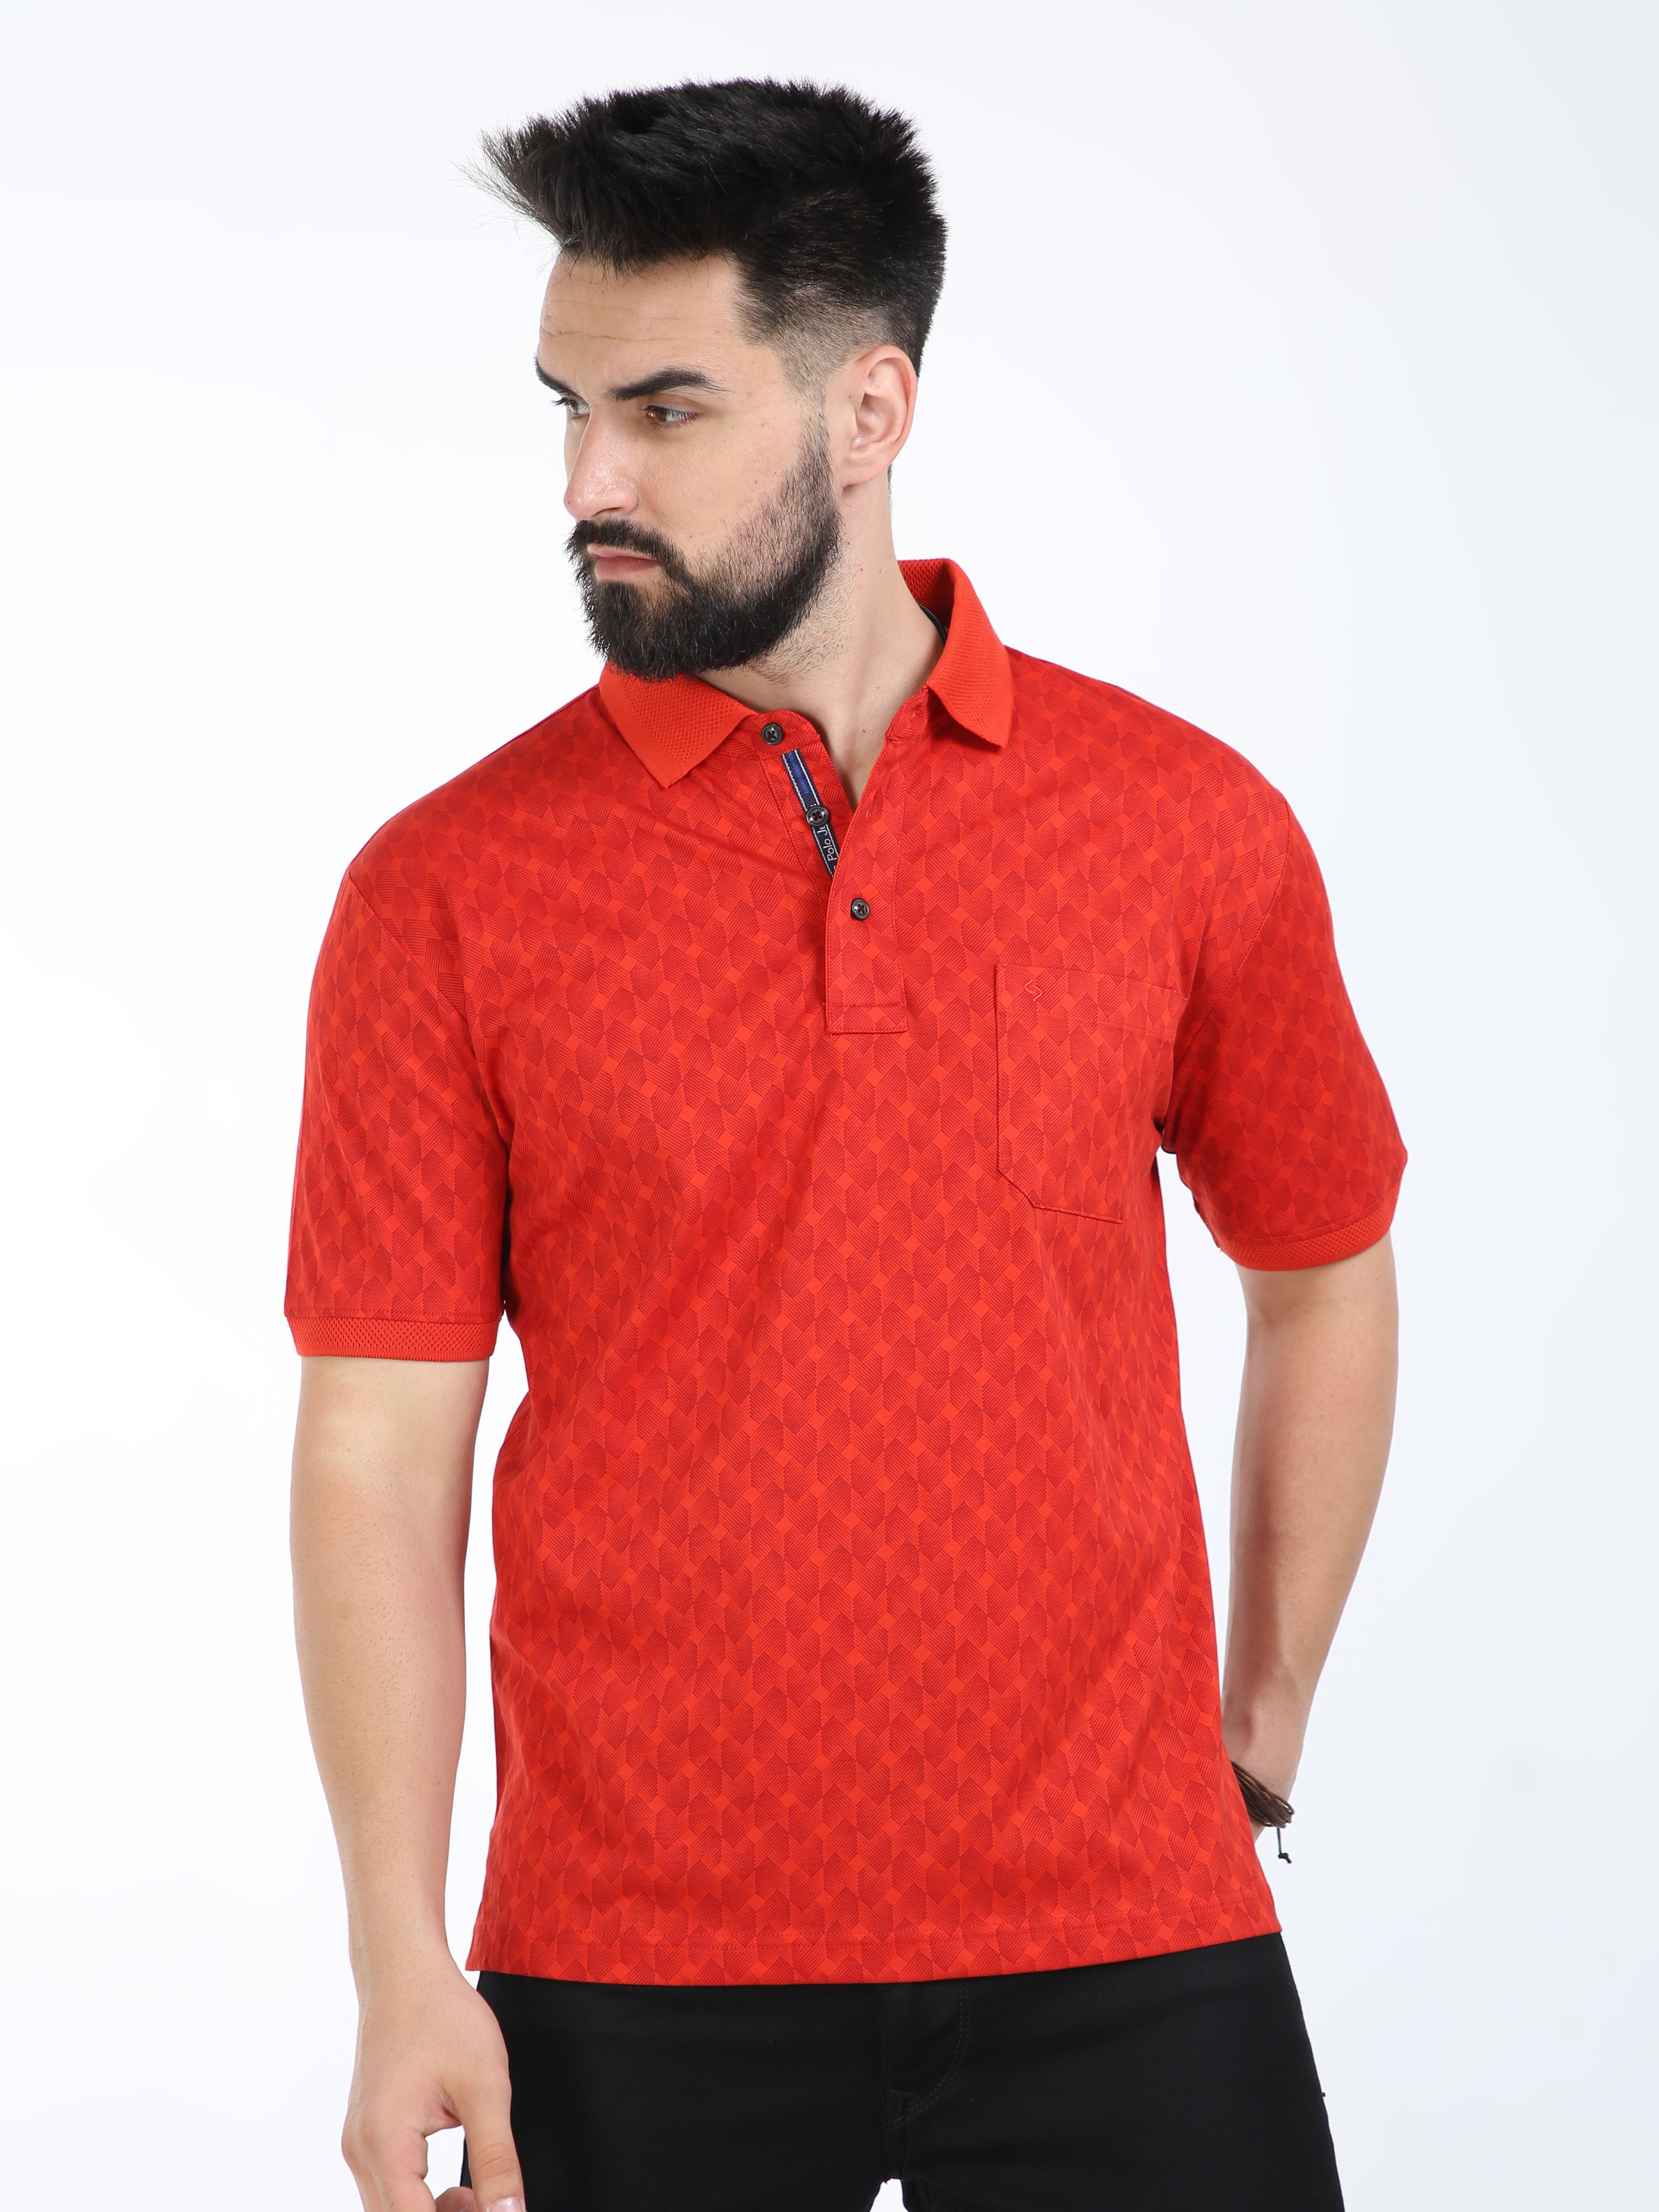 Classic Polo Mens Cotton Half Sleeves Floral Authentic Fit Polo Neck Red Color T-Shirt | Swank - 03 A Af P